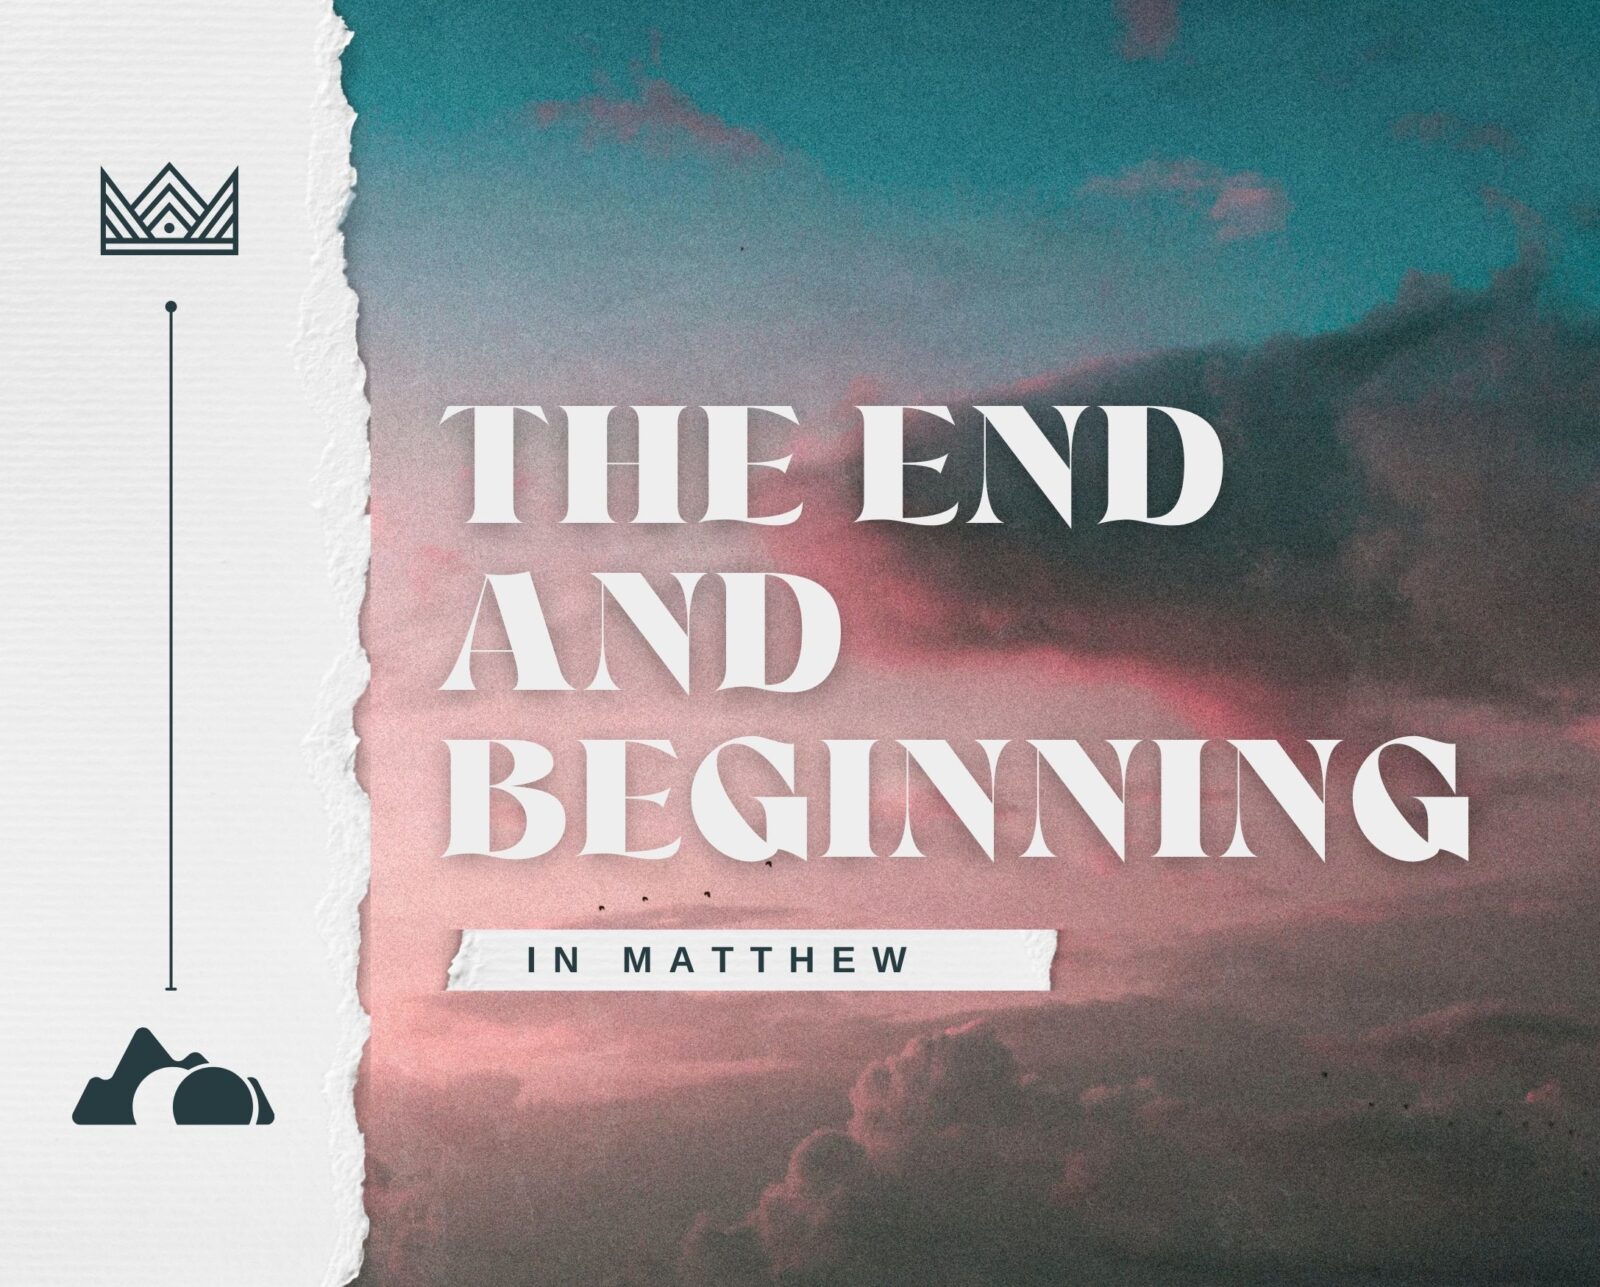 The End and Beginning in Matthew